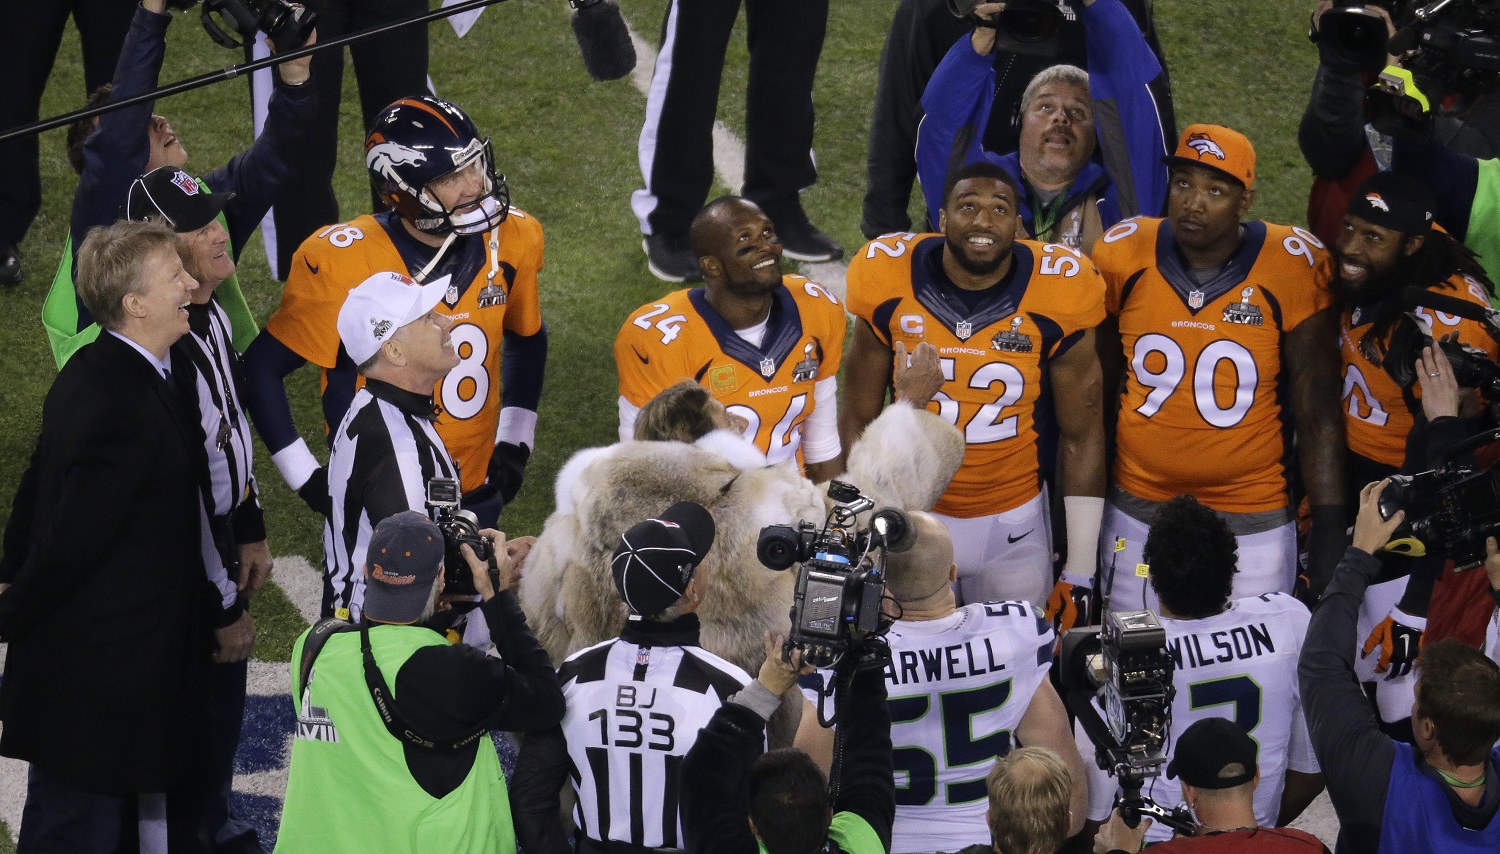 Former NFL football player Joe Namath tosses the coin before the NFL Super Bowl XLVIII football game between the Seattle Seahawks and the Denver Broncos, Sunday, Feb. 2, 2014, in East Rutherford, N.J. (AP Photo/Mel Evans)